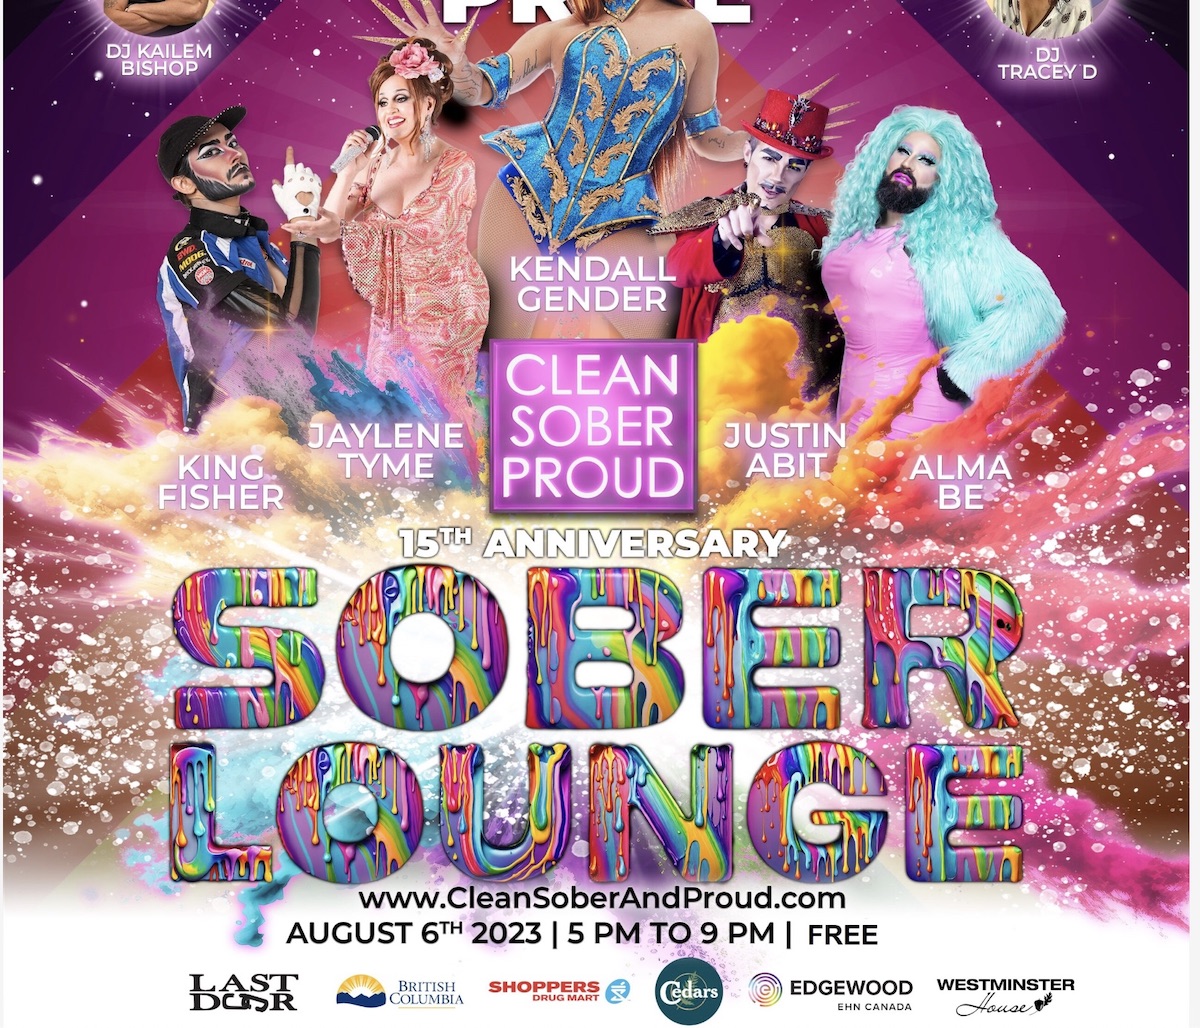 A screengrab of the bottom of the event poster, showing that Vancouver Pride no longer appears.